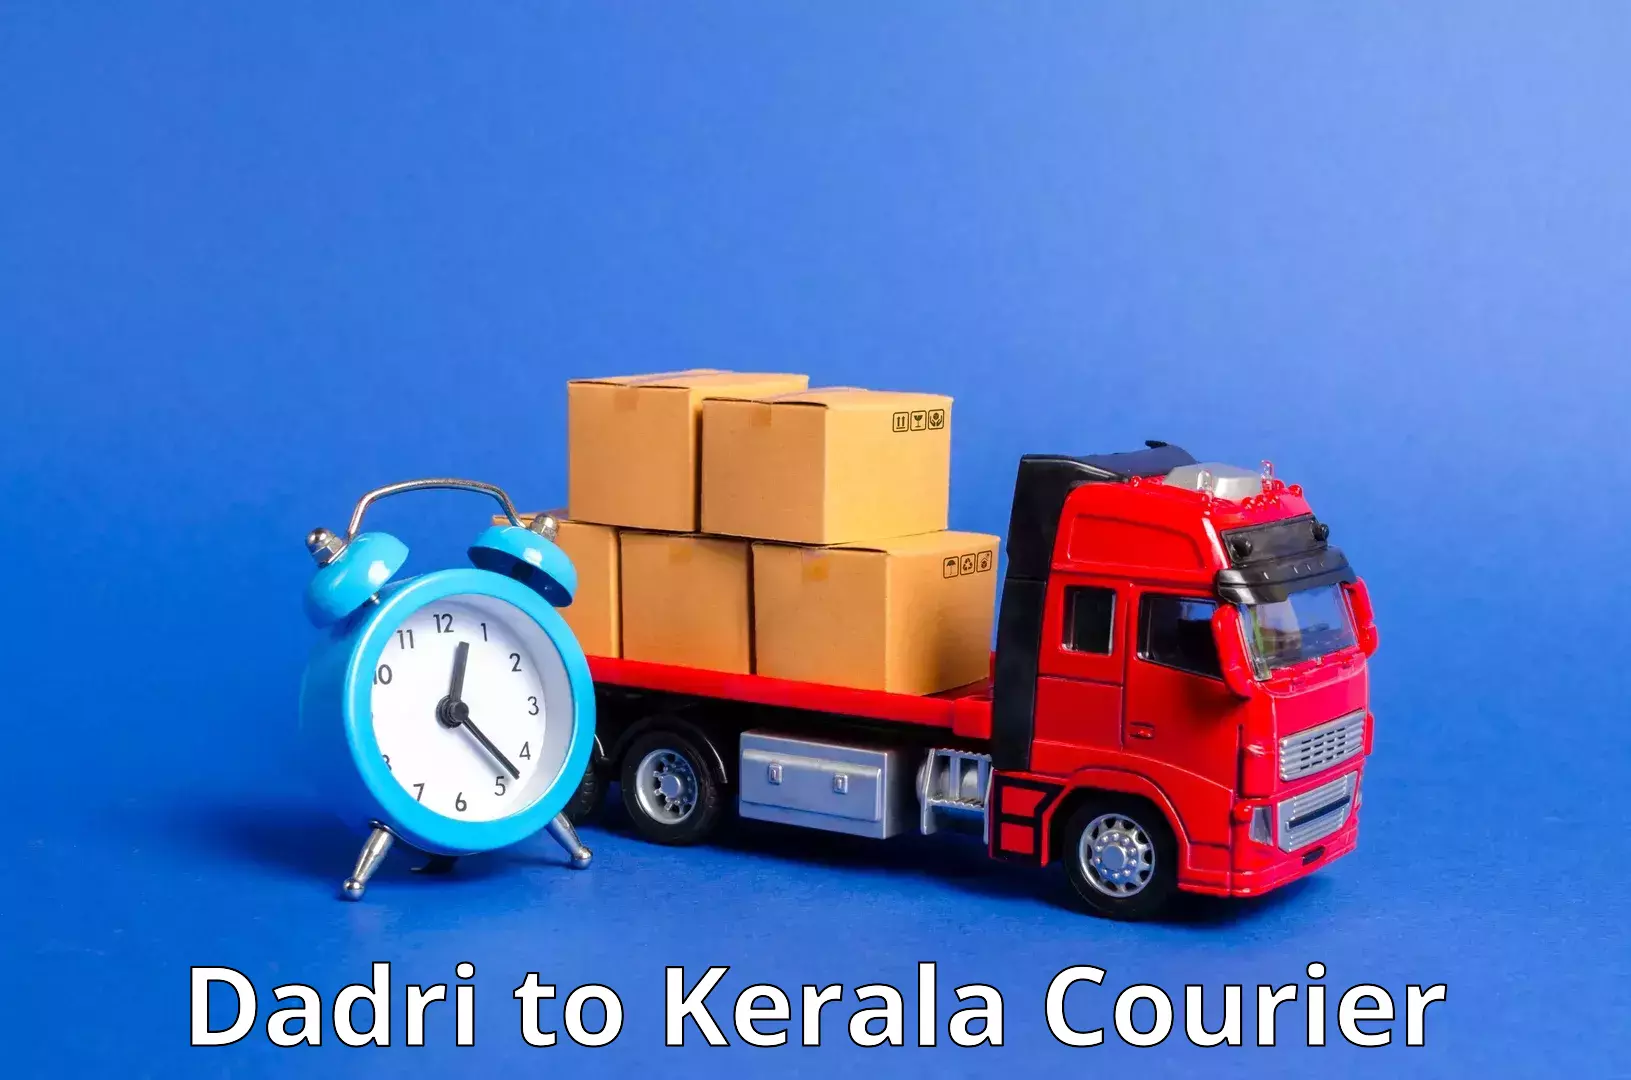 Full-service courier options Dadri to Kerala